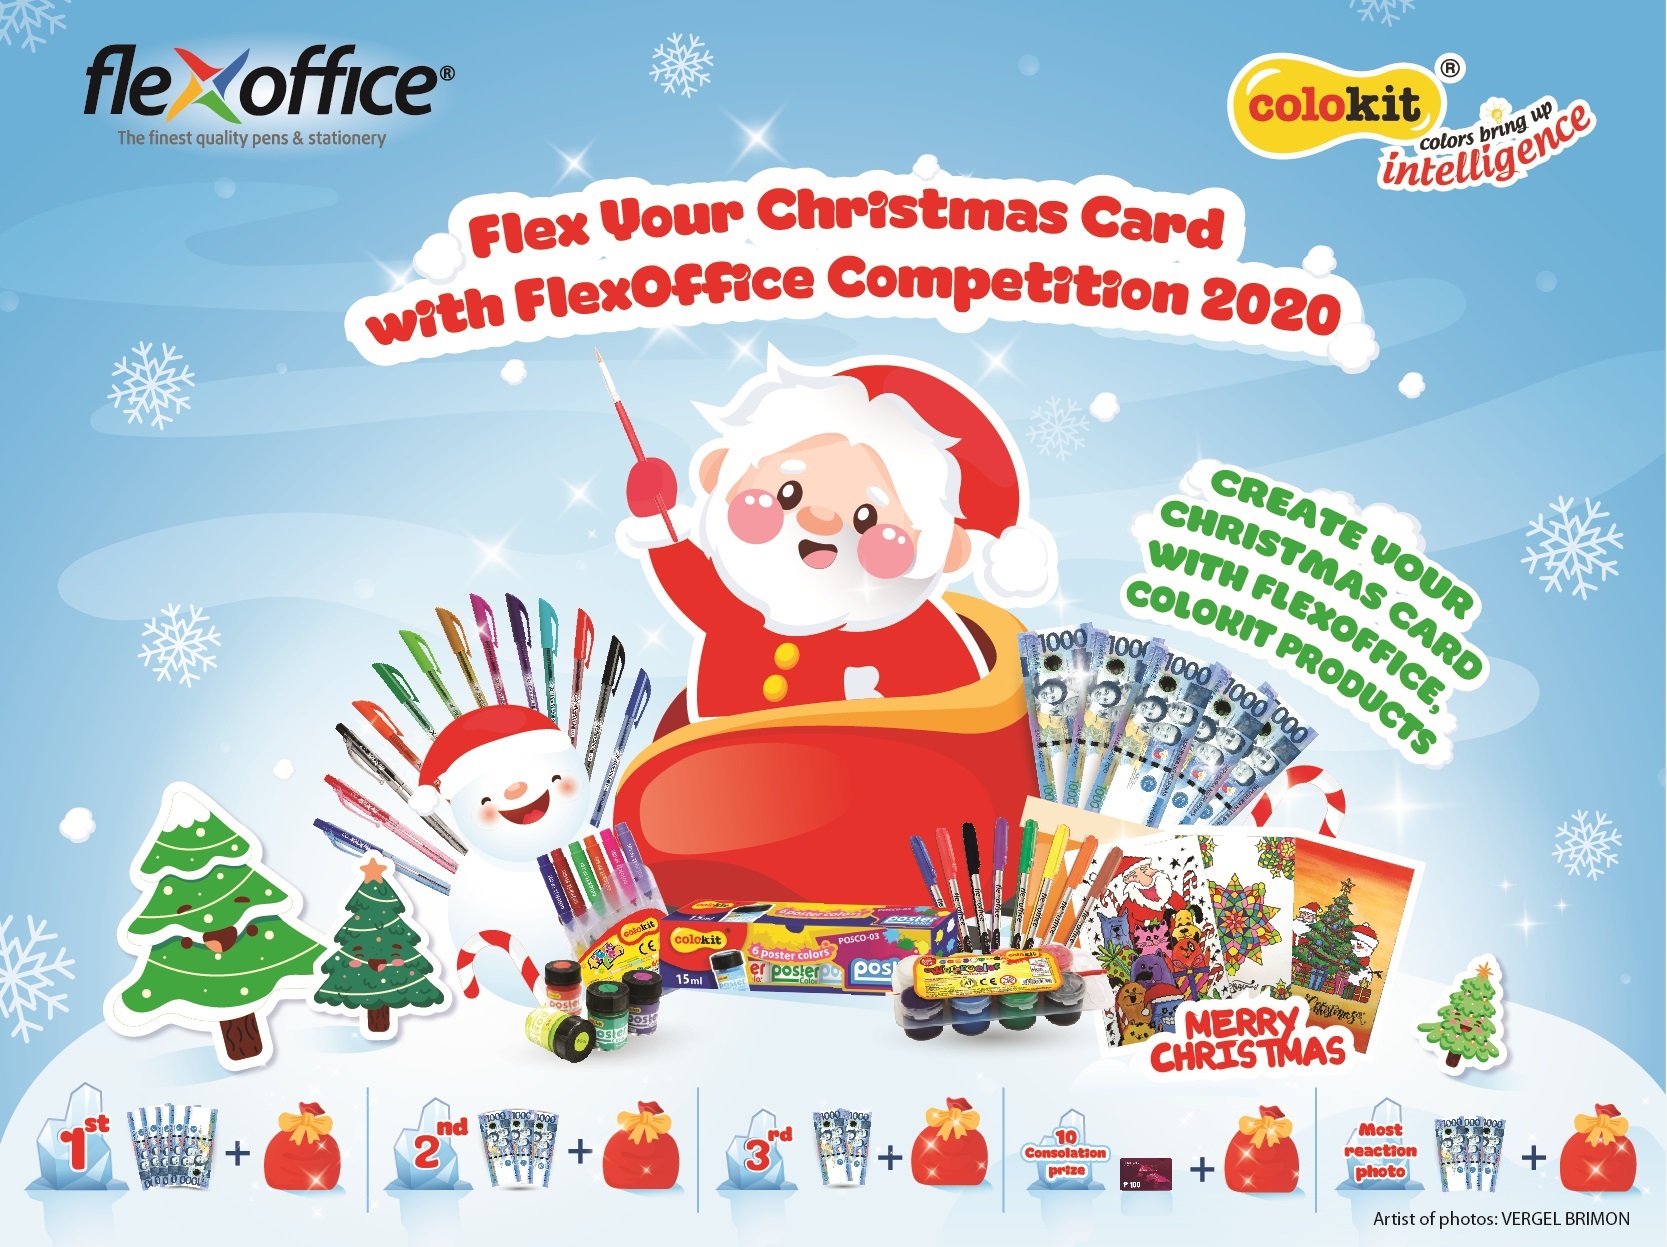 FlexOffice Philippines: Flex Your Christmas Card with FlexOffice Competition 2020